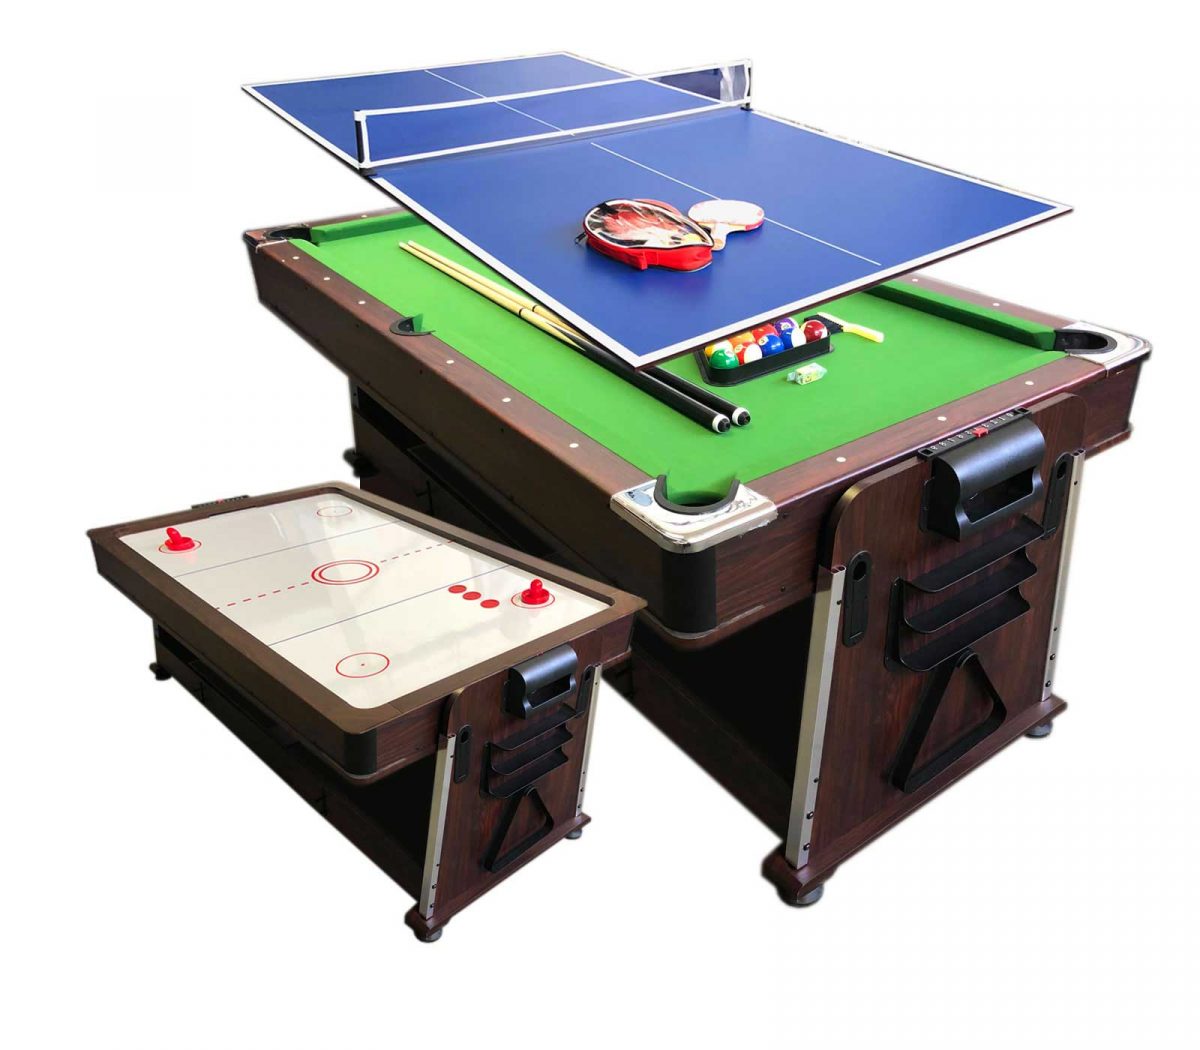 Get To Know The Ping Pong Pool Table Cover Benefit And Usage | Table Covers Depot